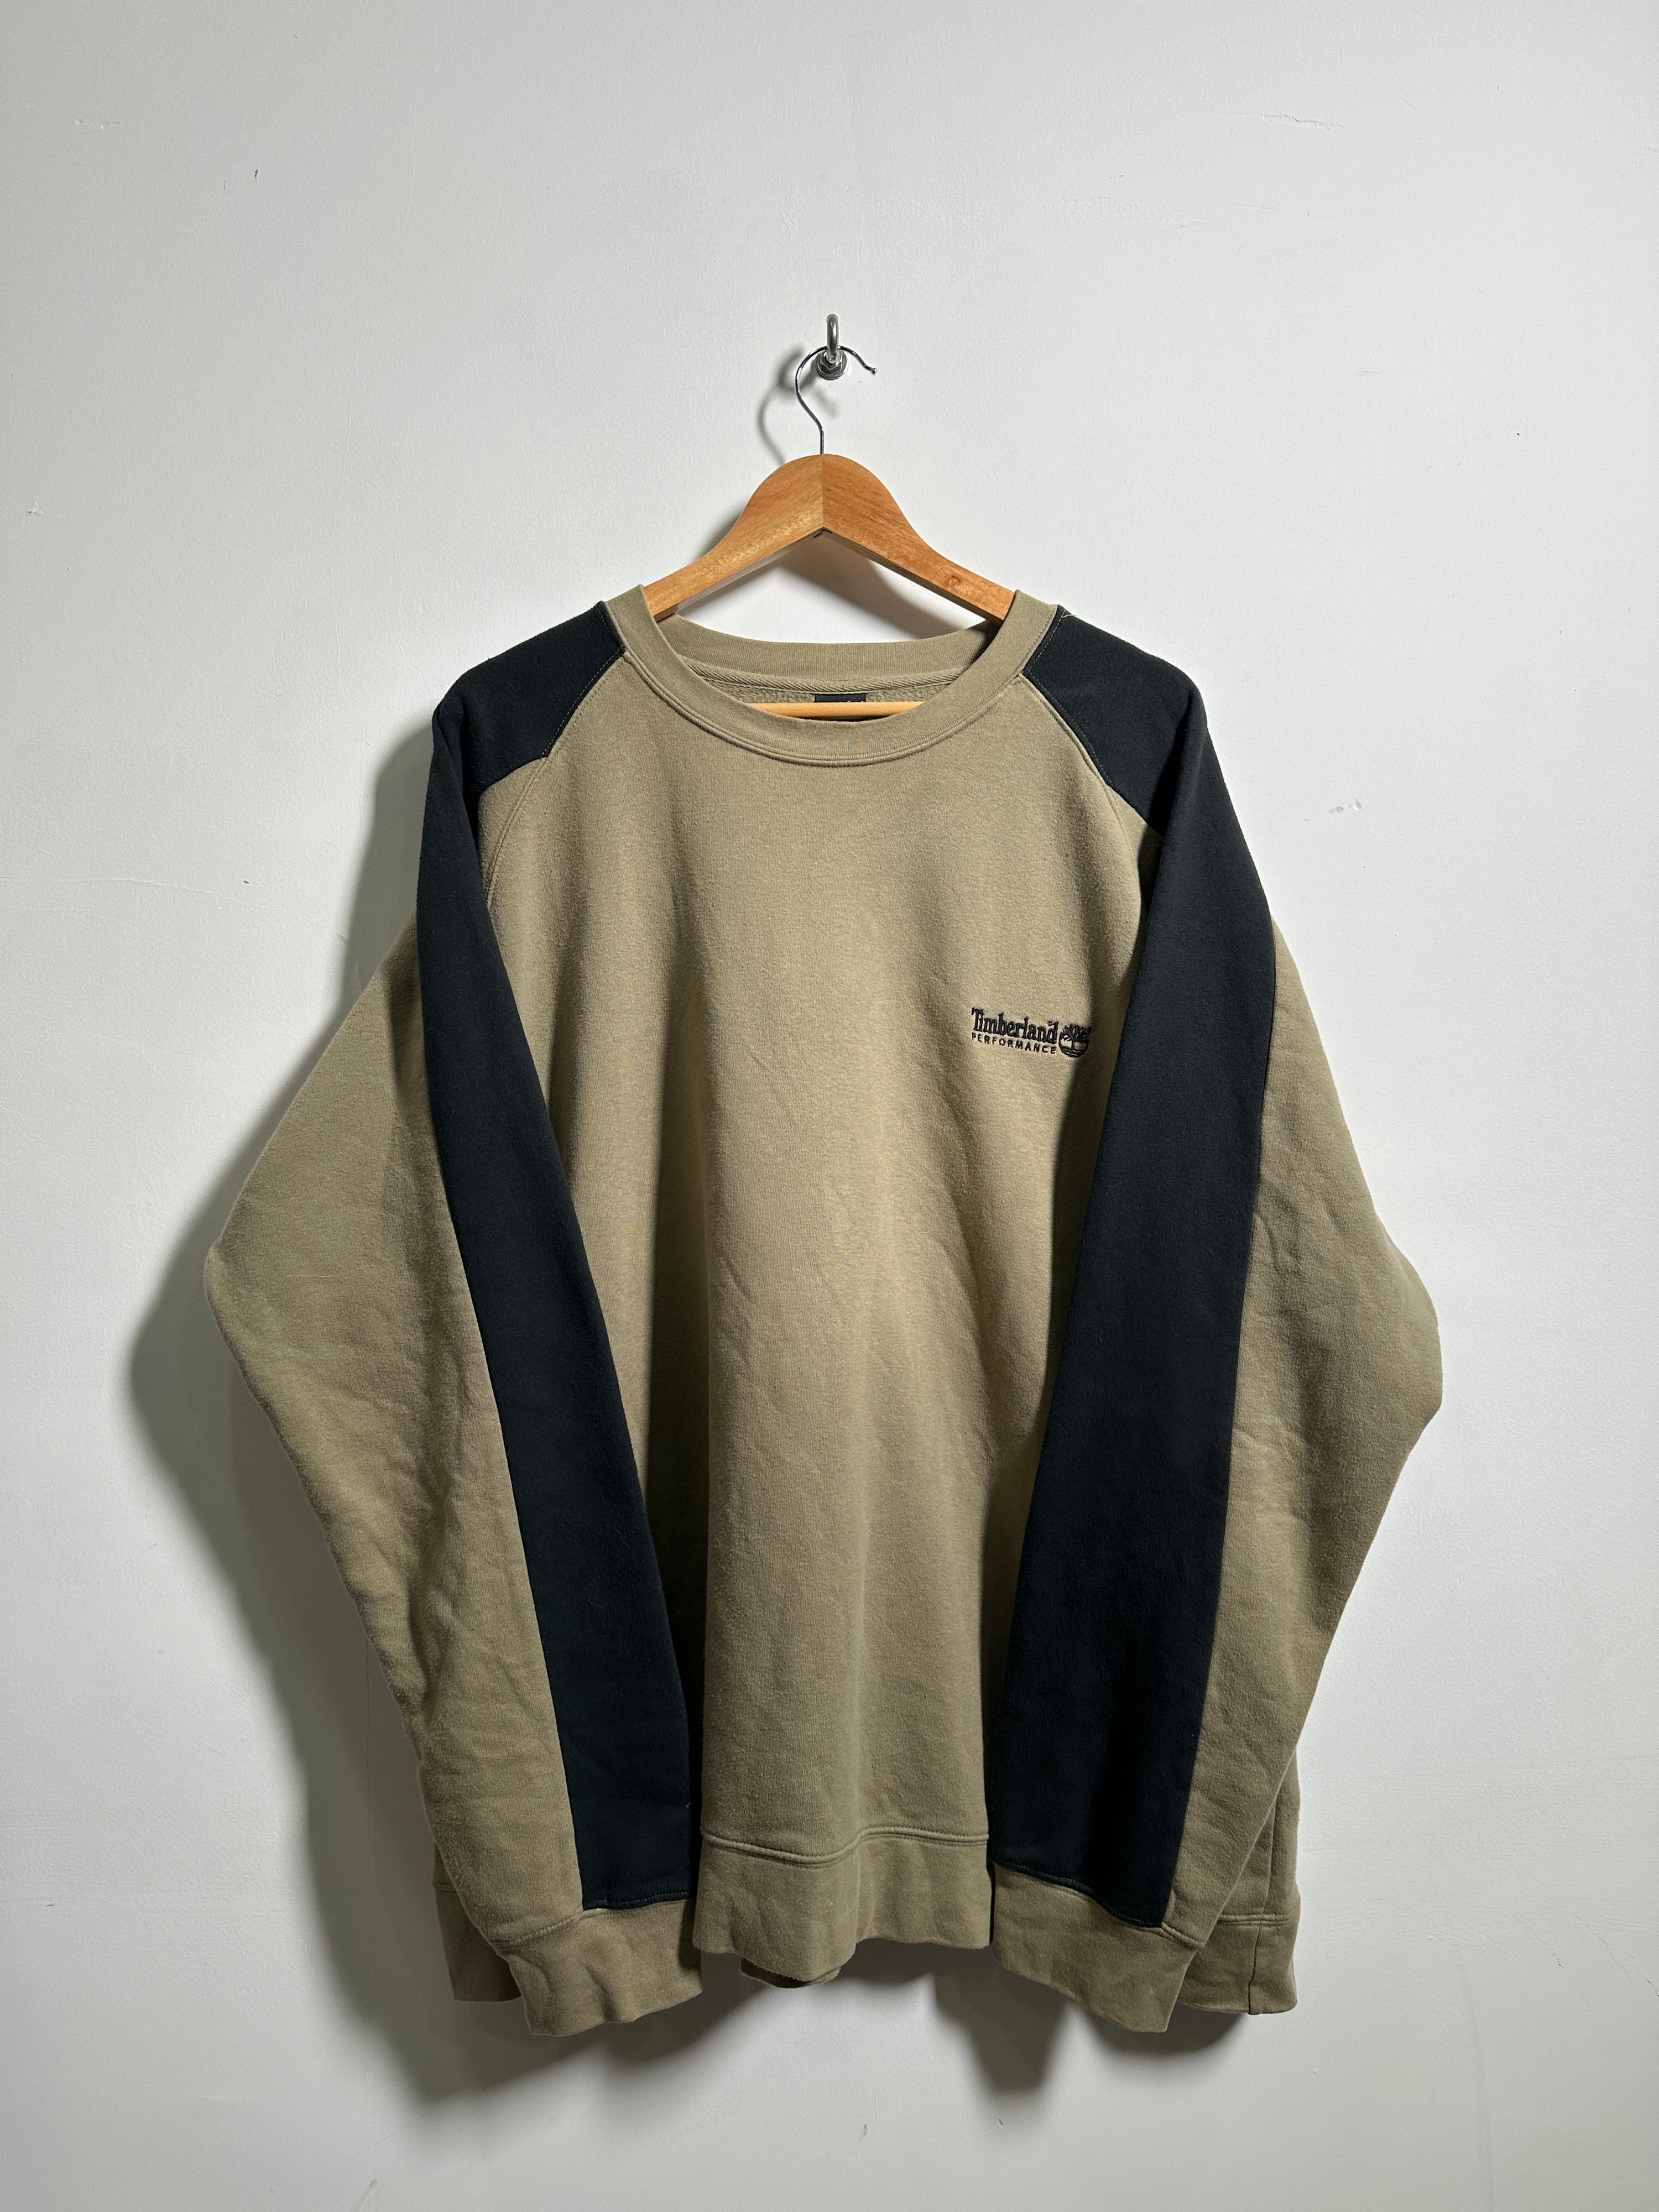 TIMBERLAND vintage crew neck sweater in beige and black